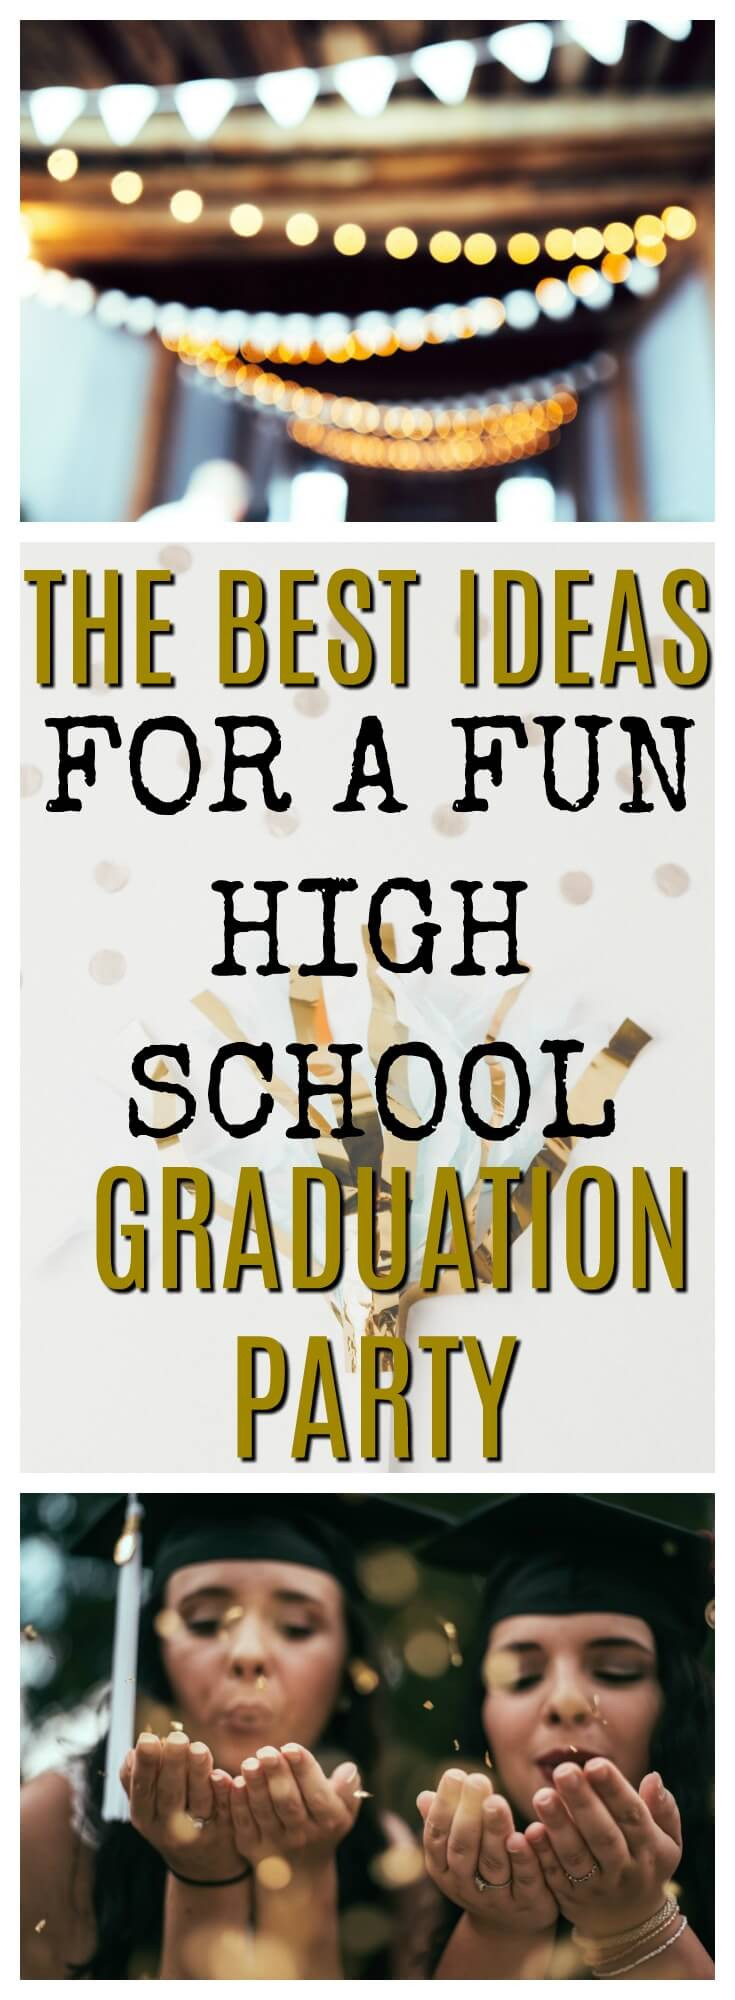 Funny Graduation Party Ideas
 Graduation Party Ideas 2019 How to Celebrate [step by step]